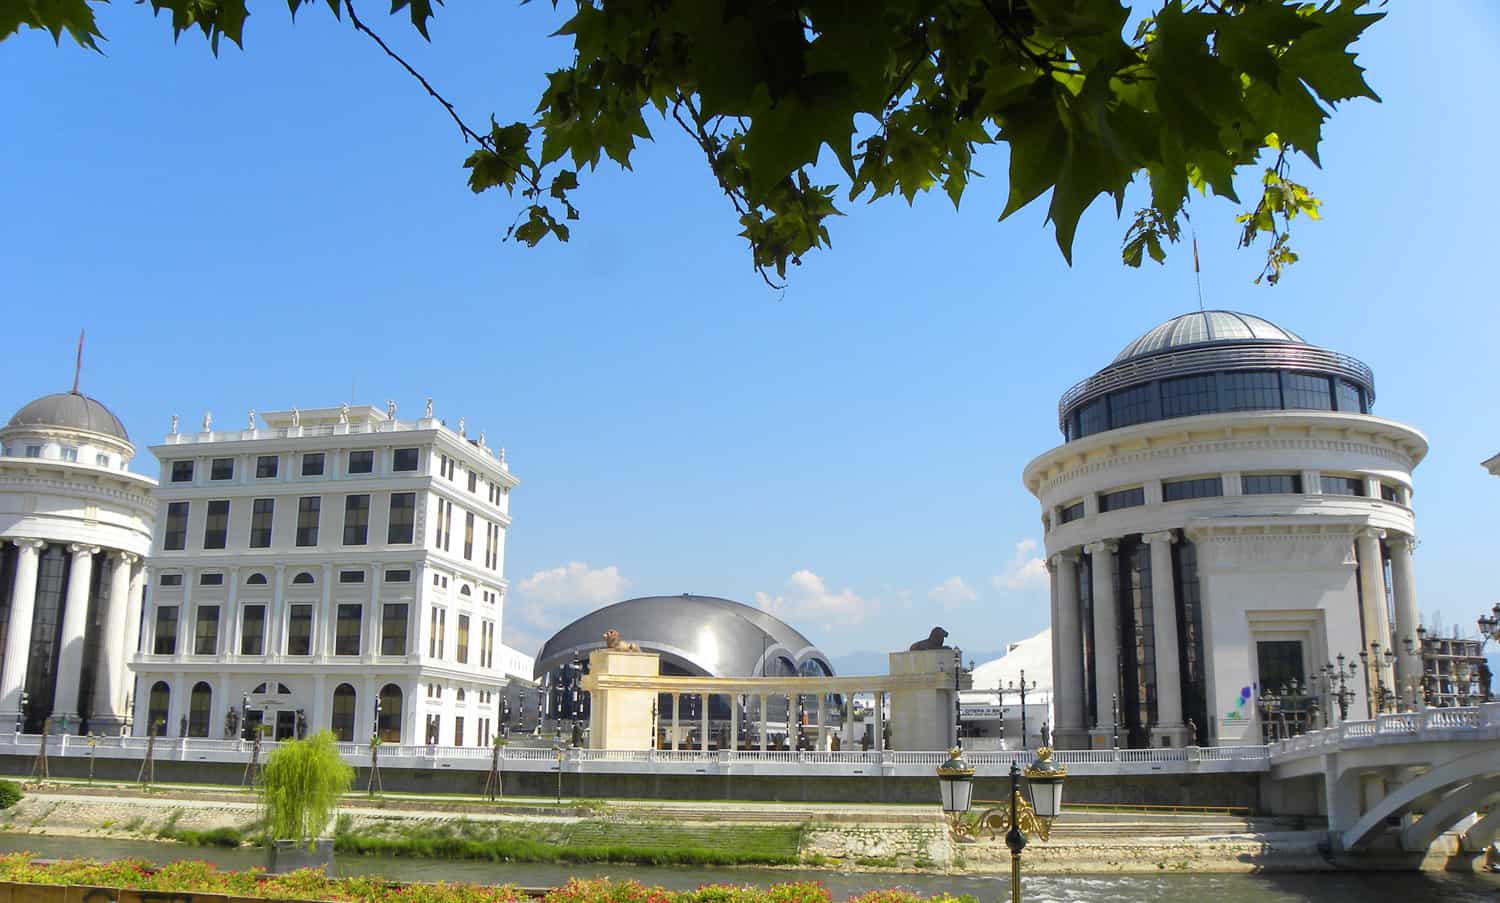 Why Skopje is one of the Strangest Places we've been